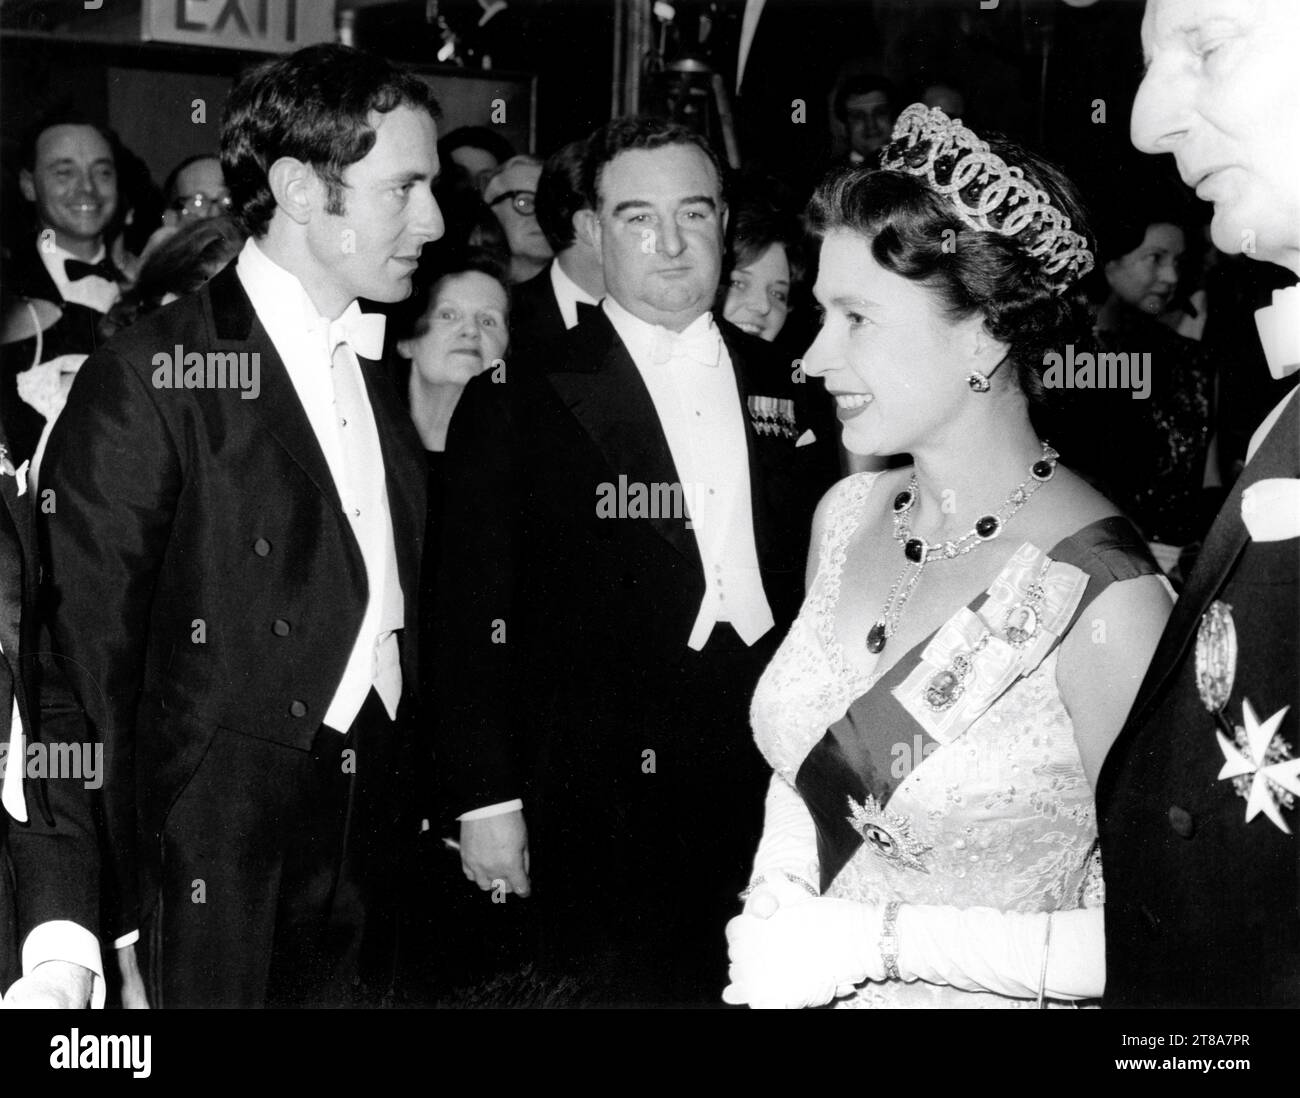 Composer JOHN BARRY talking to QUEEN ELIZABETH II on March 14th 1966 at the Royal Film Performance of BORN FREE 1966 director JAMES HILL book Joy Adamson music John Barry Open Road Films / Atlas / Highroad / Columbia Pictures Corporation Stock Photo